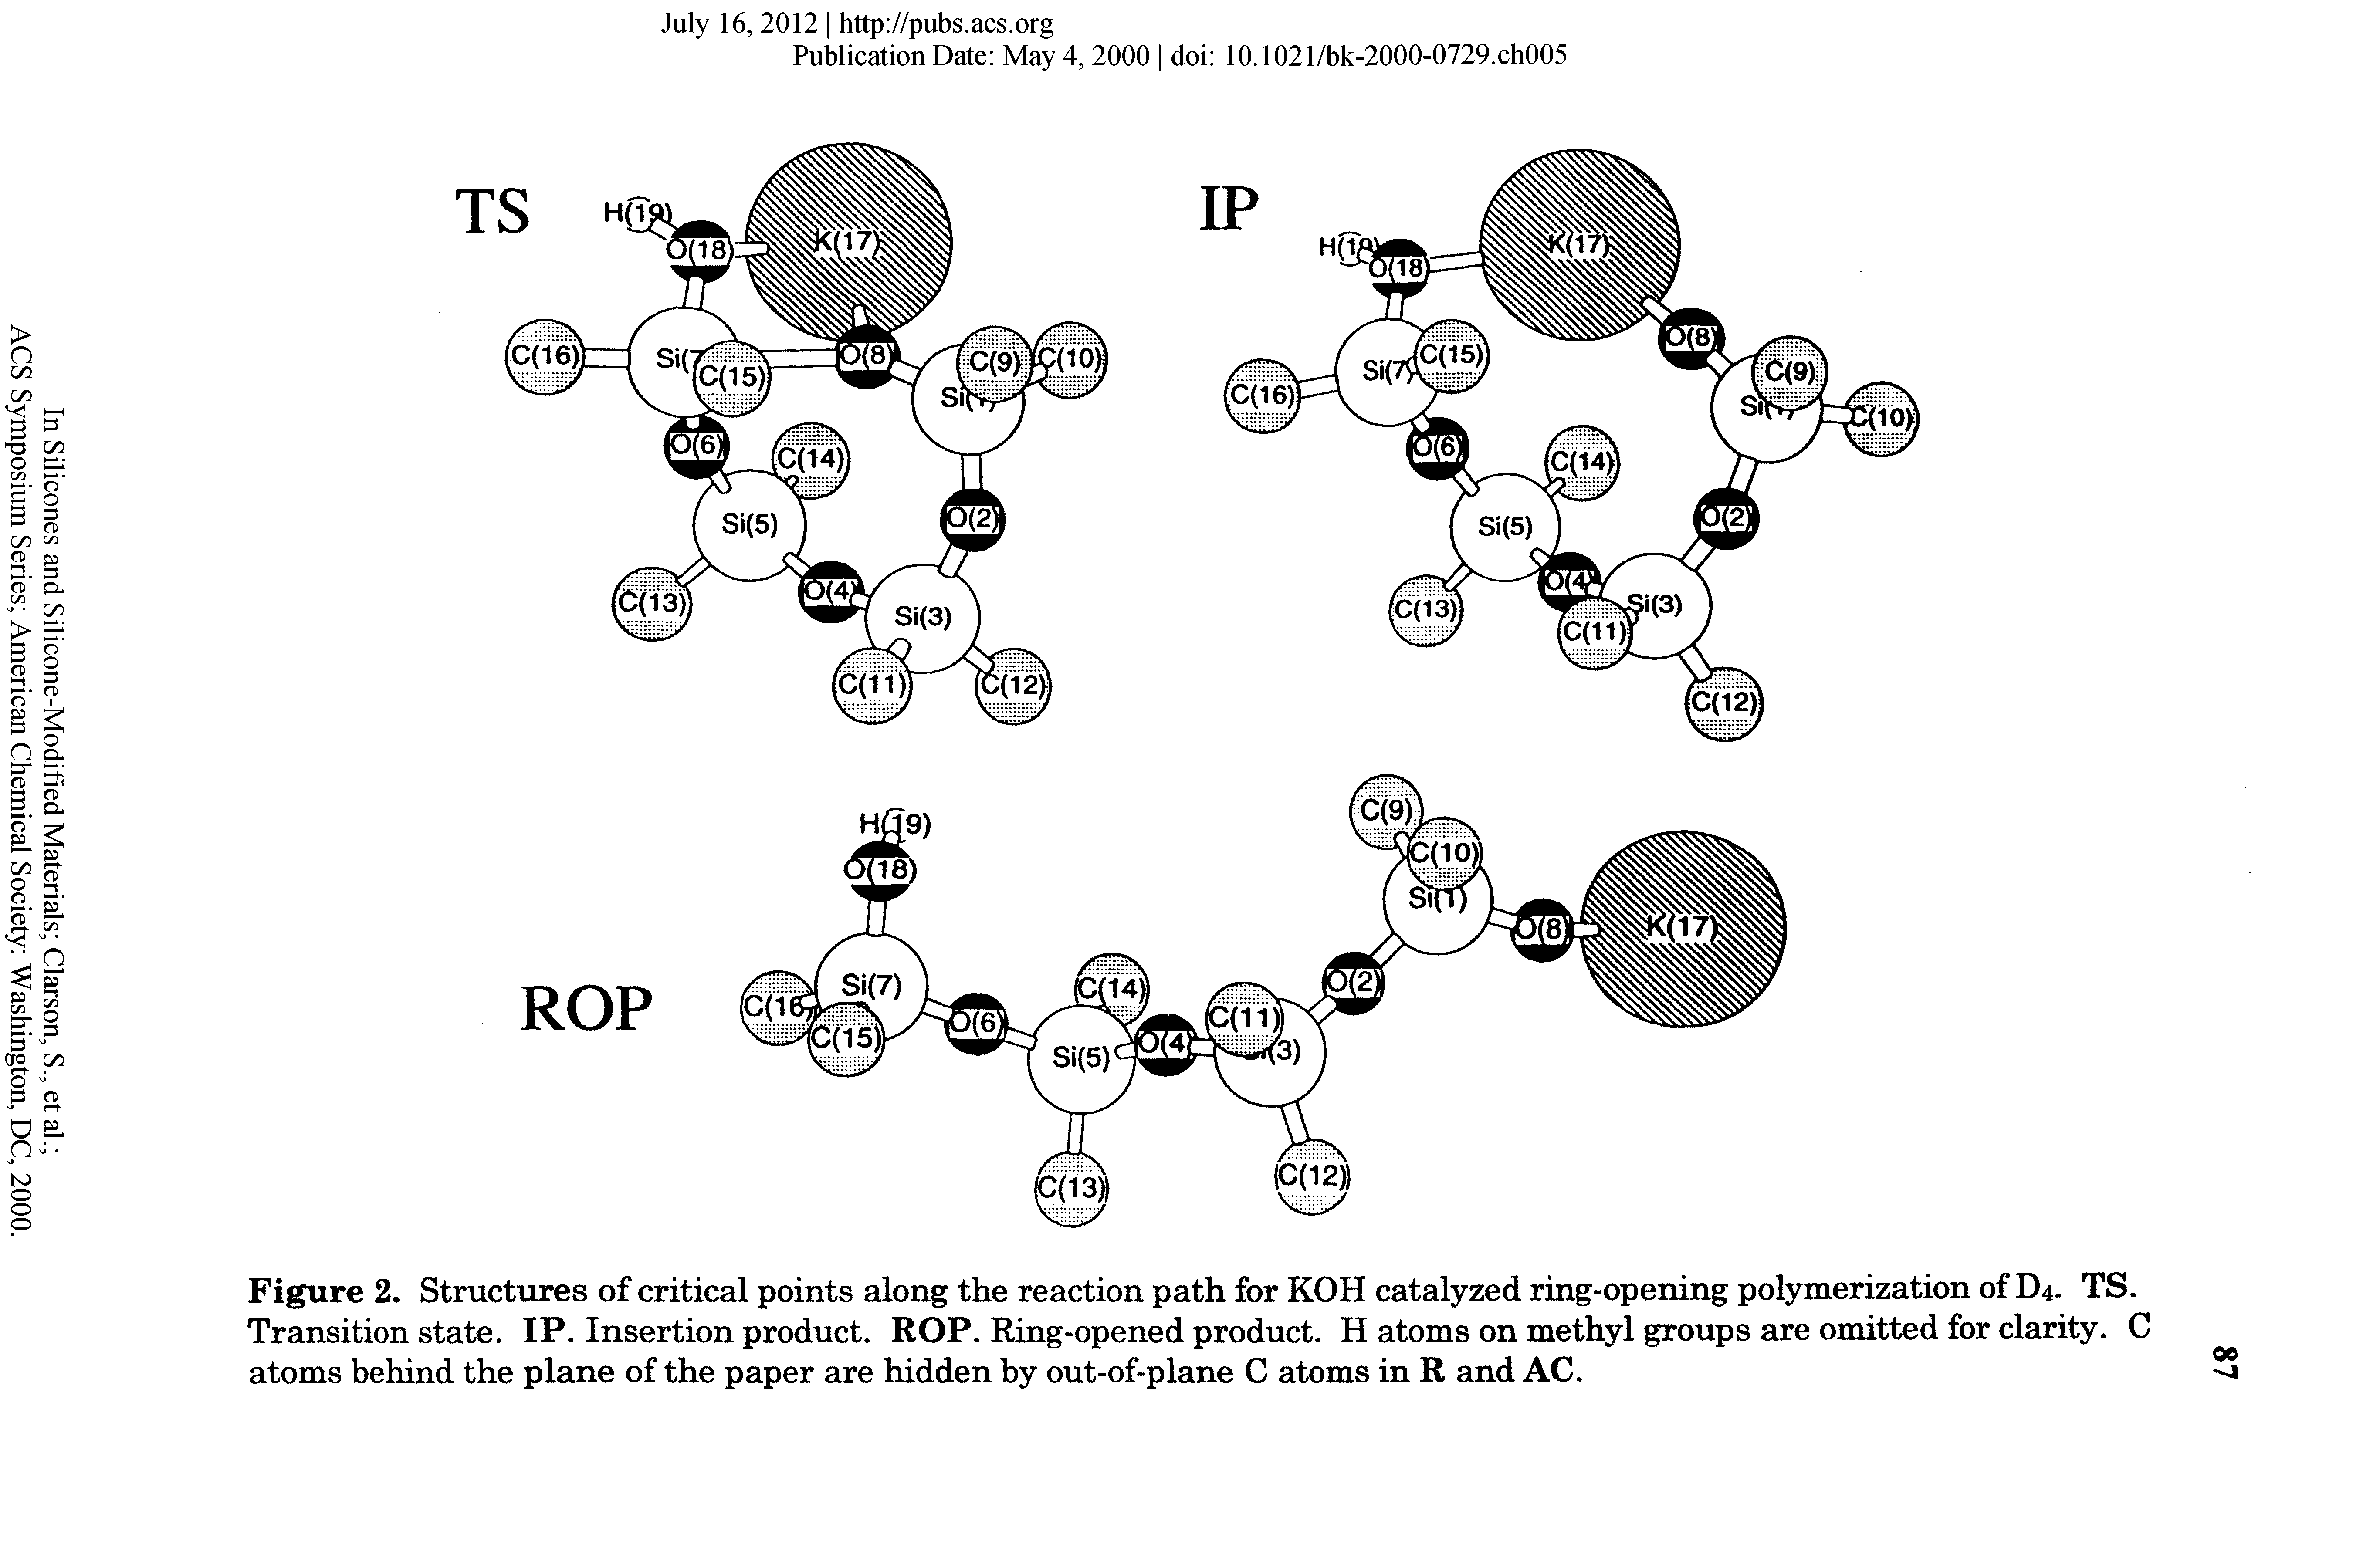 Figure 2. Structures of critical points along the reaction path for KOH catalyzed ring-opening polymerization of D4. TS. Transition state. IP. Insertion product. ROP. Ring-opened product. H atoms on methyl groups are omitted for clarity. C atoms behind the plane of the paper are hidden by out-of-plane C atoms in R and AC.